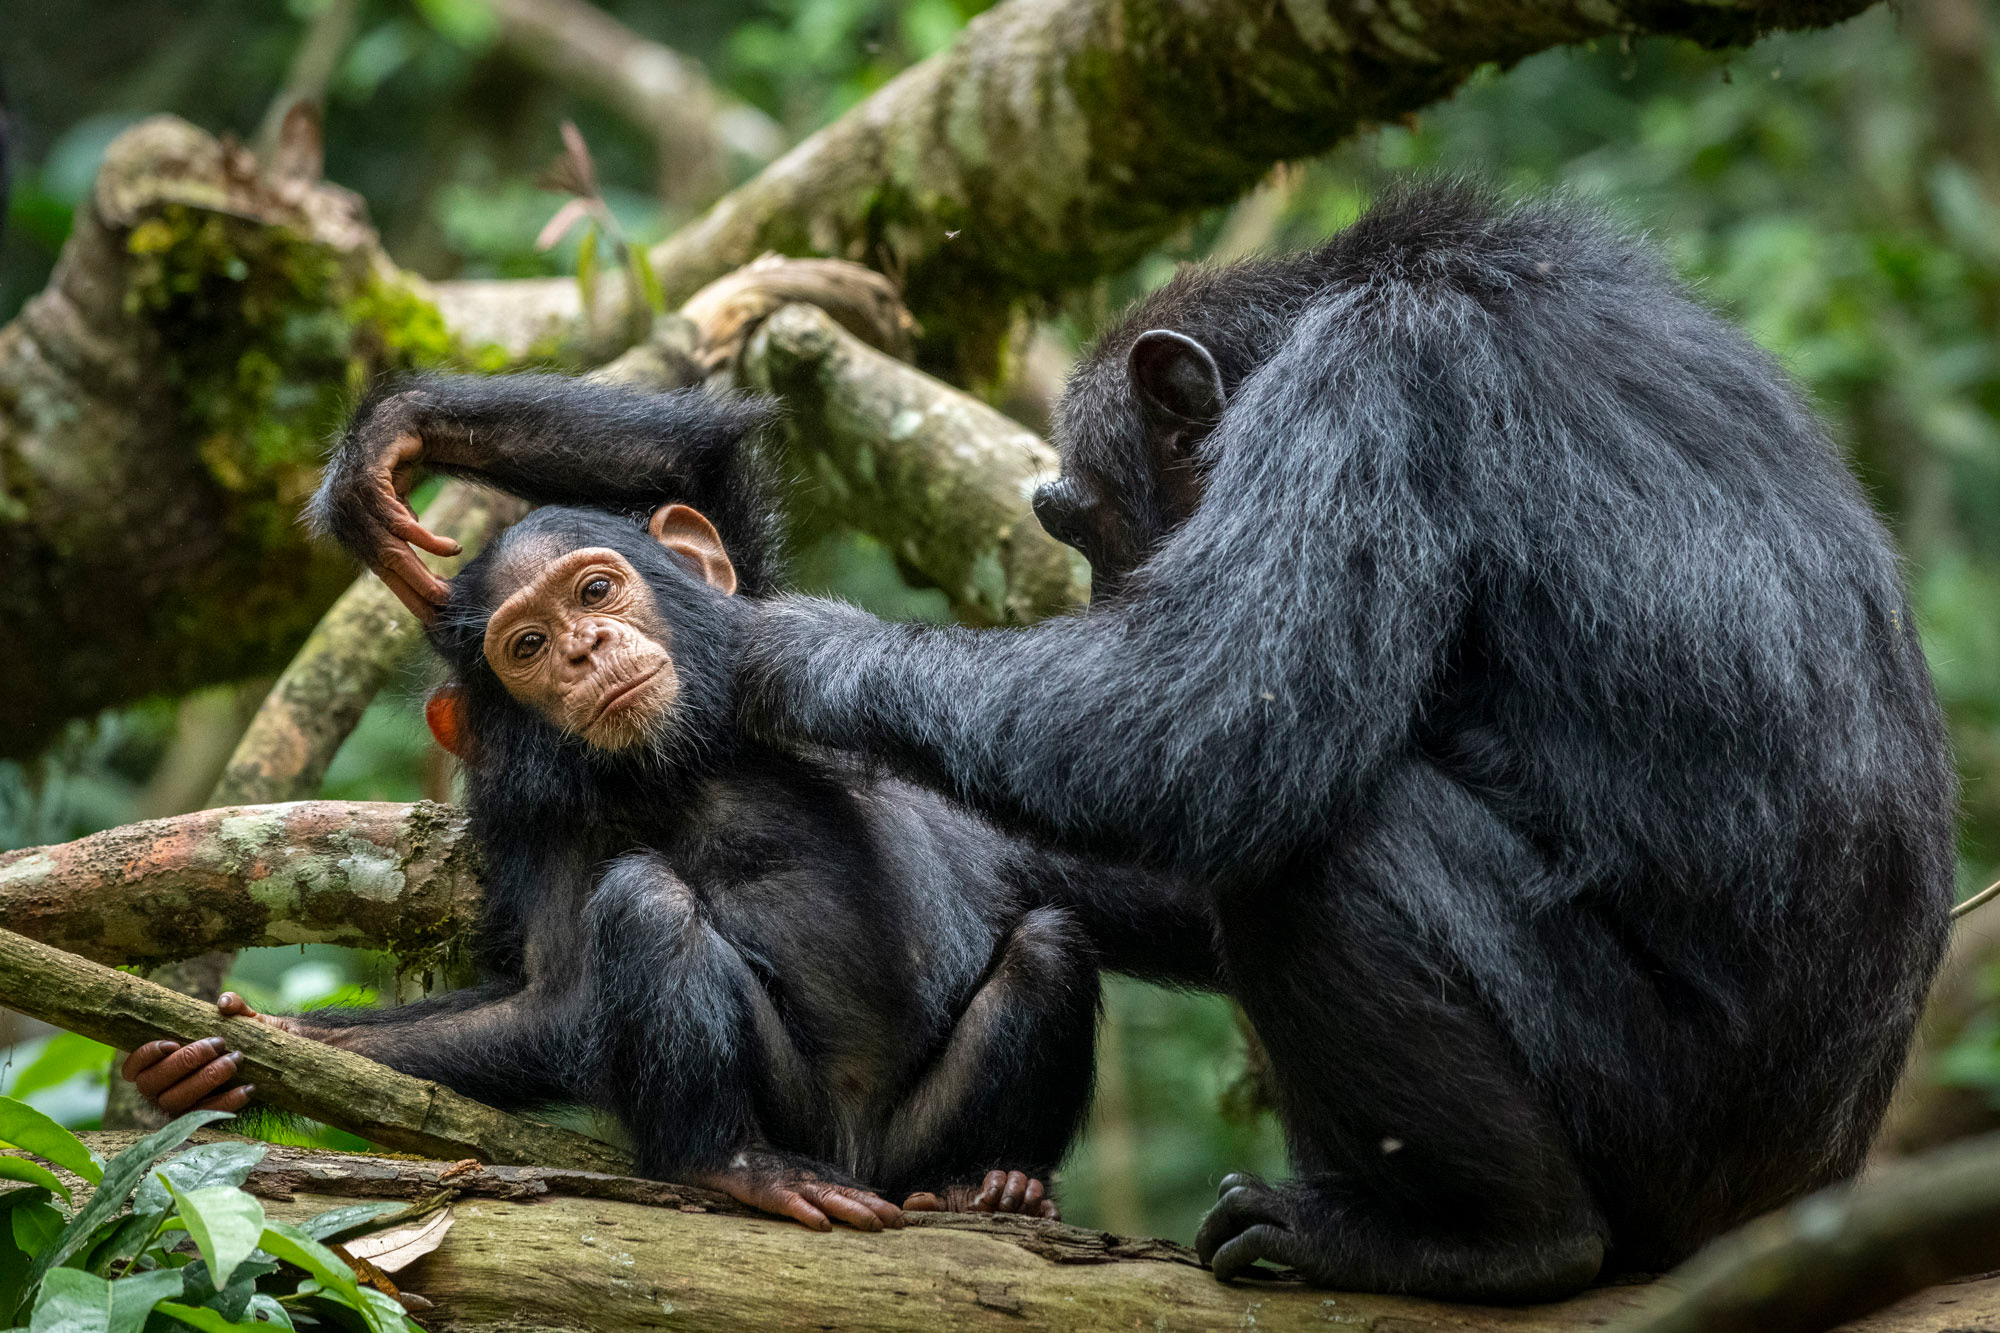 A chimpanzee grooms a youngster in Kibale National Park, Uganda © Artur Stankiewicz